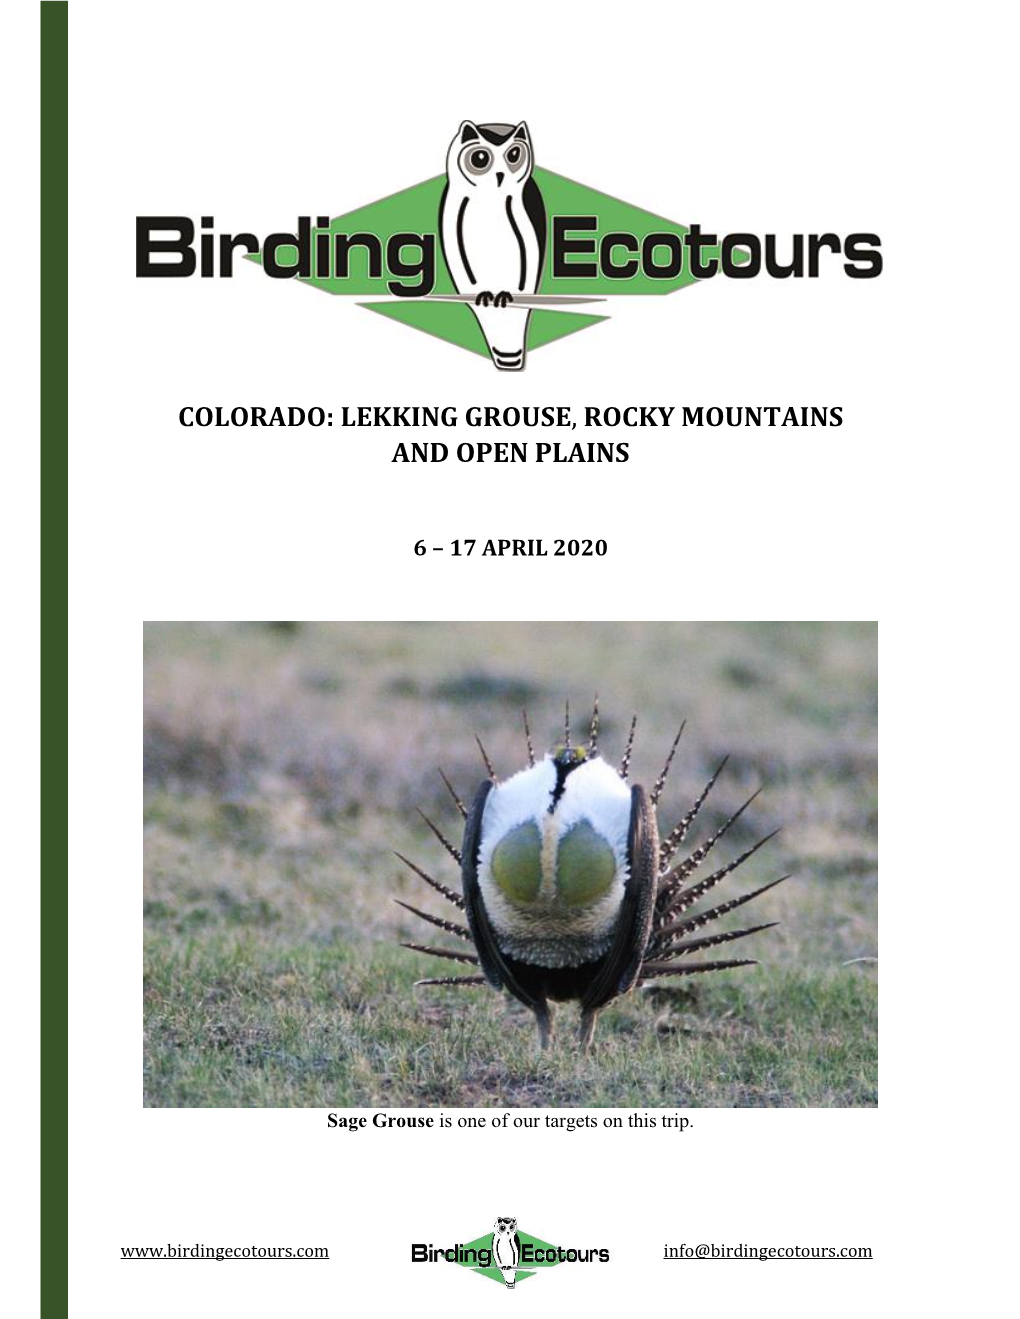 Colorado: Lekking Grouse, Rocky Mountains and Open Plains